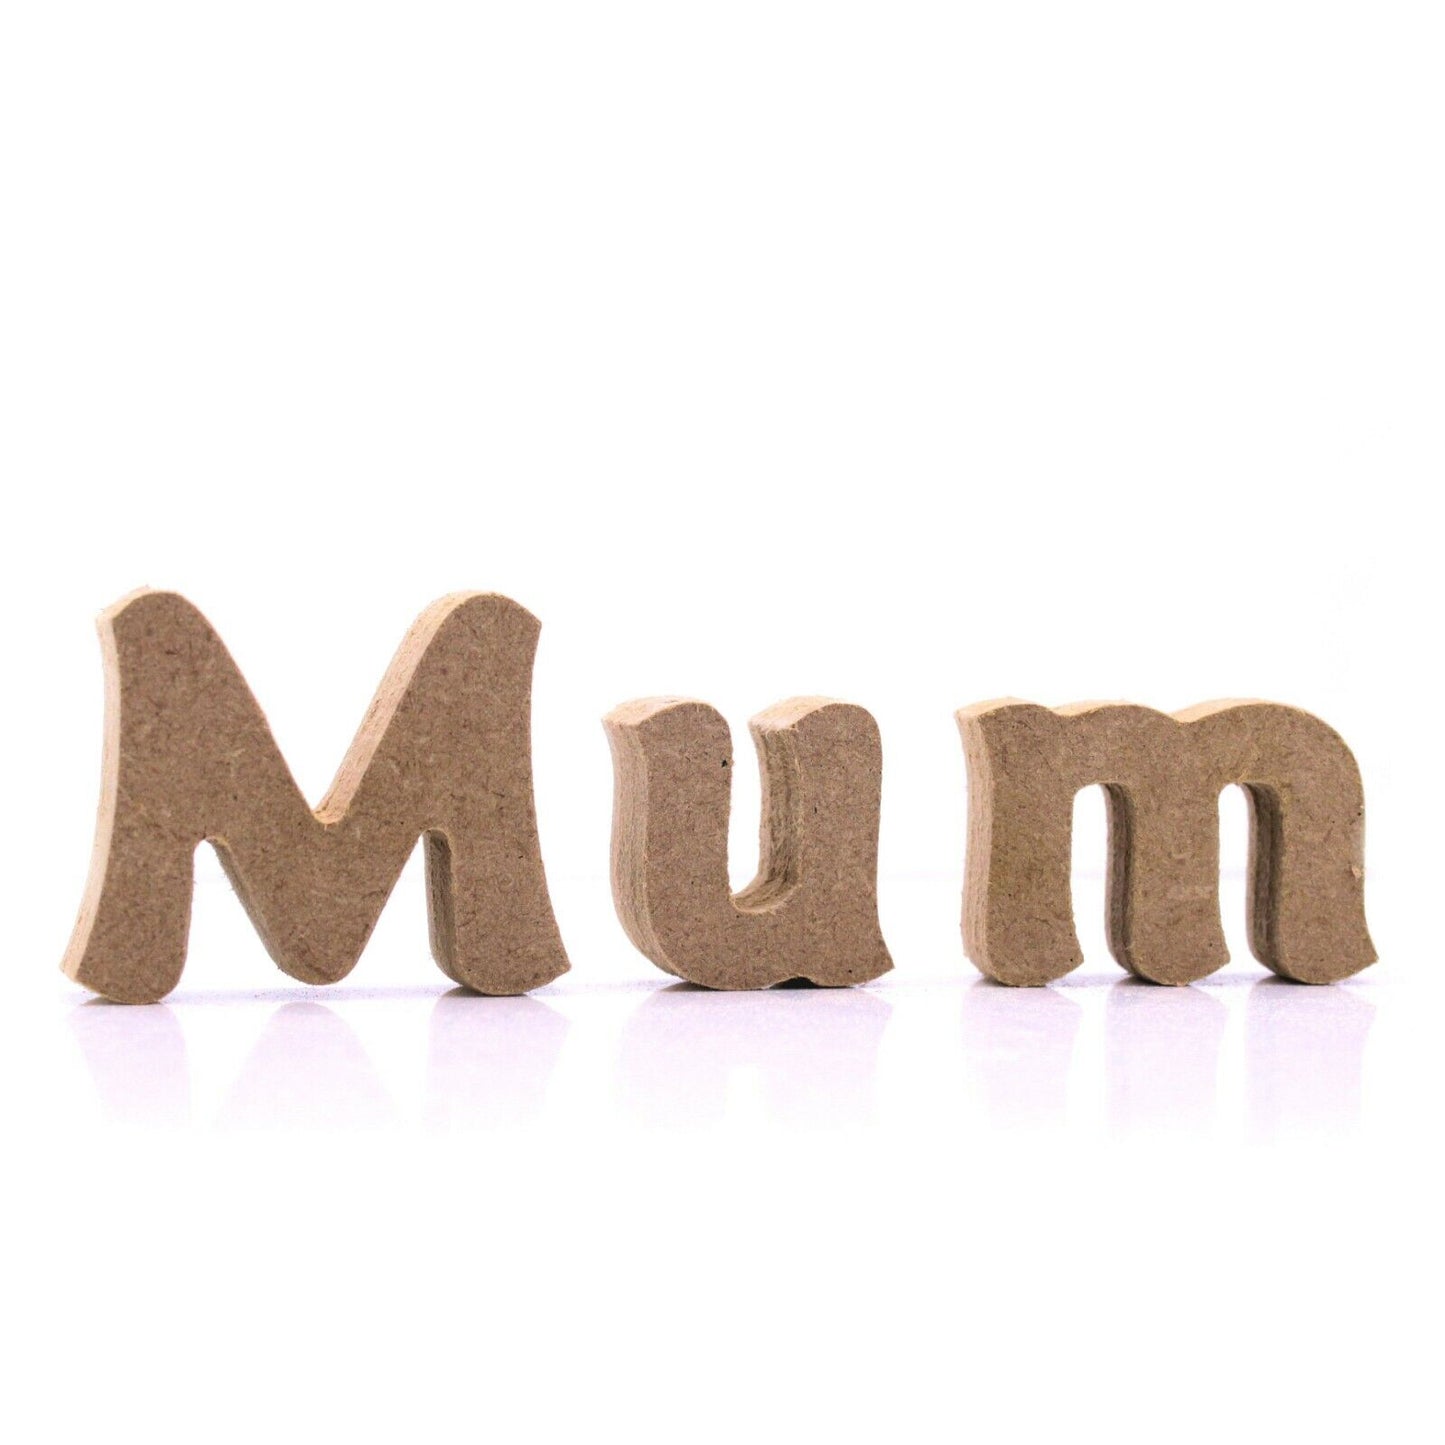 Free Standing 18mm MDF Mum Word Various Sizes. Mother's Day, Birthday, Kid Craft